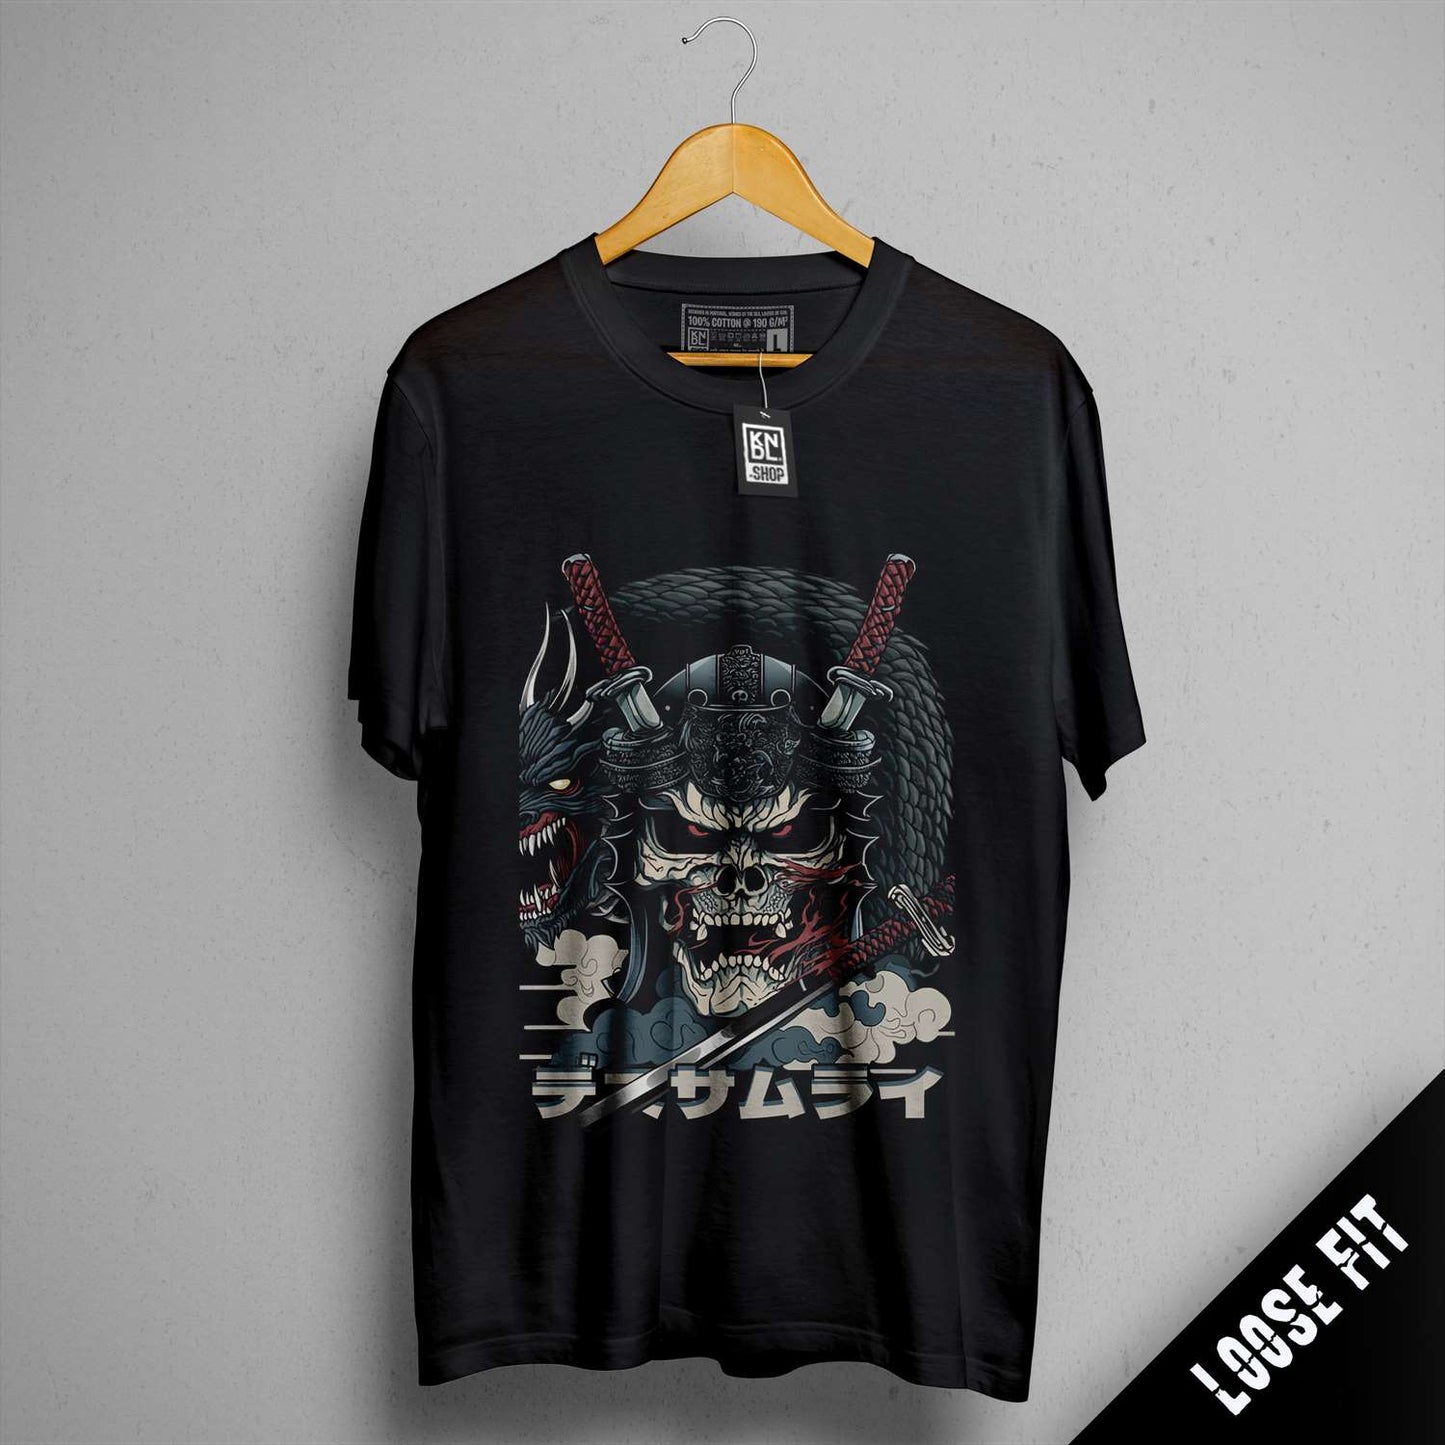 a t - shirt with a skull and two swords on it